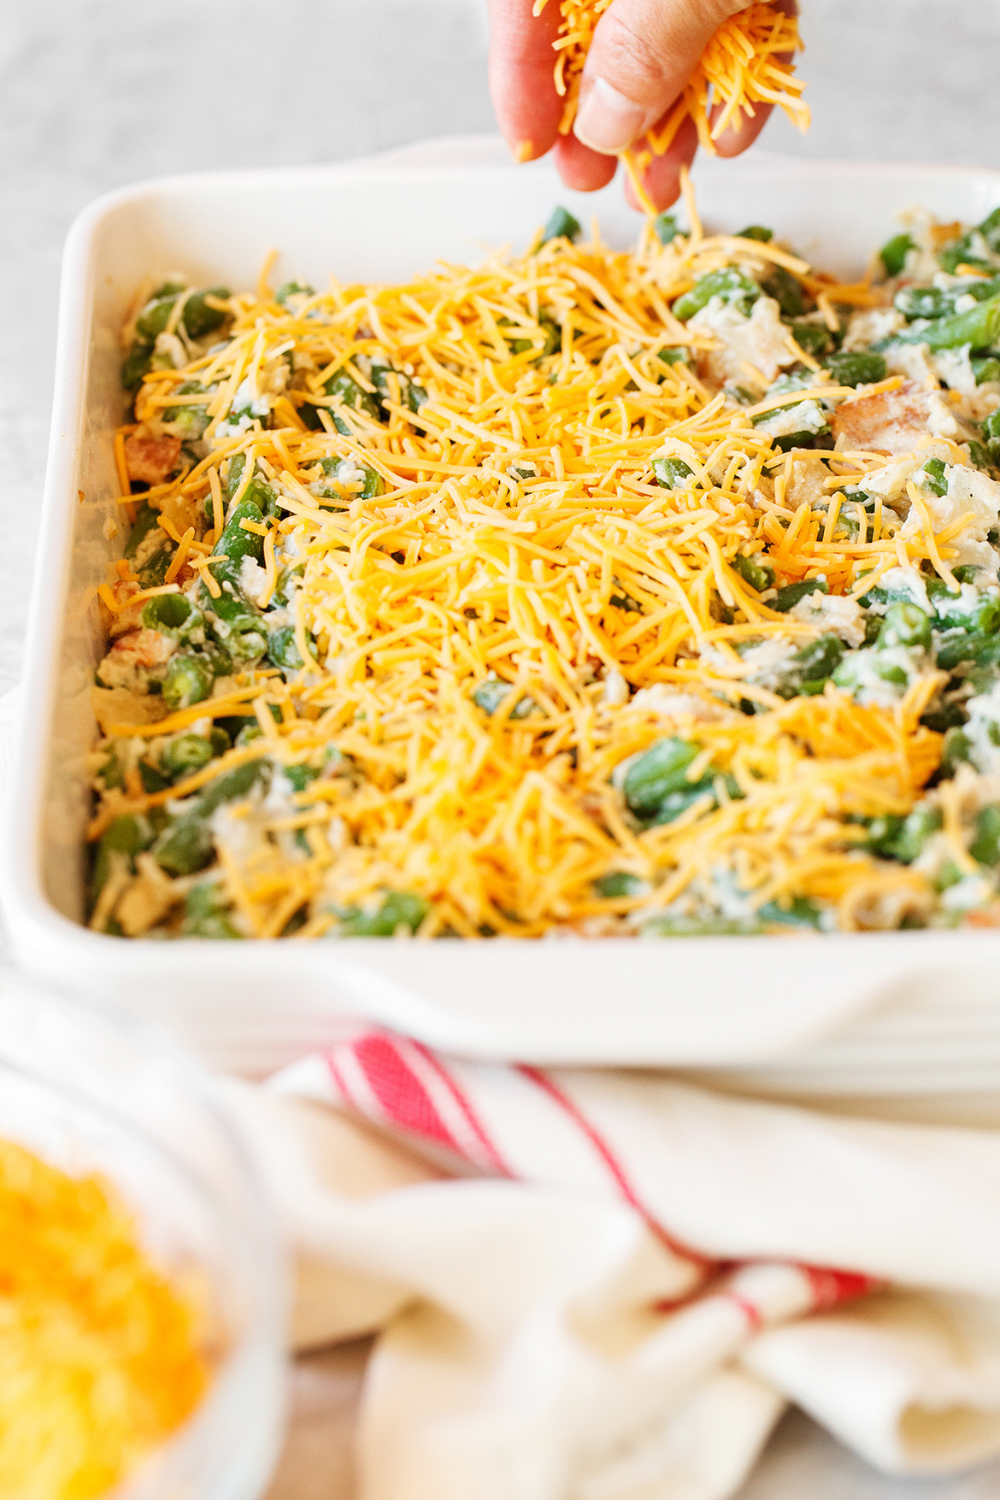 a hand sprinkling cheese across the Green Bean Casserole in its white ceramic casserole dish, before baking.